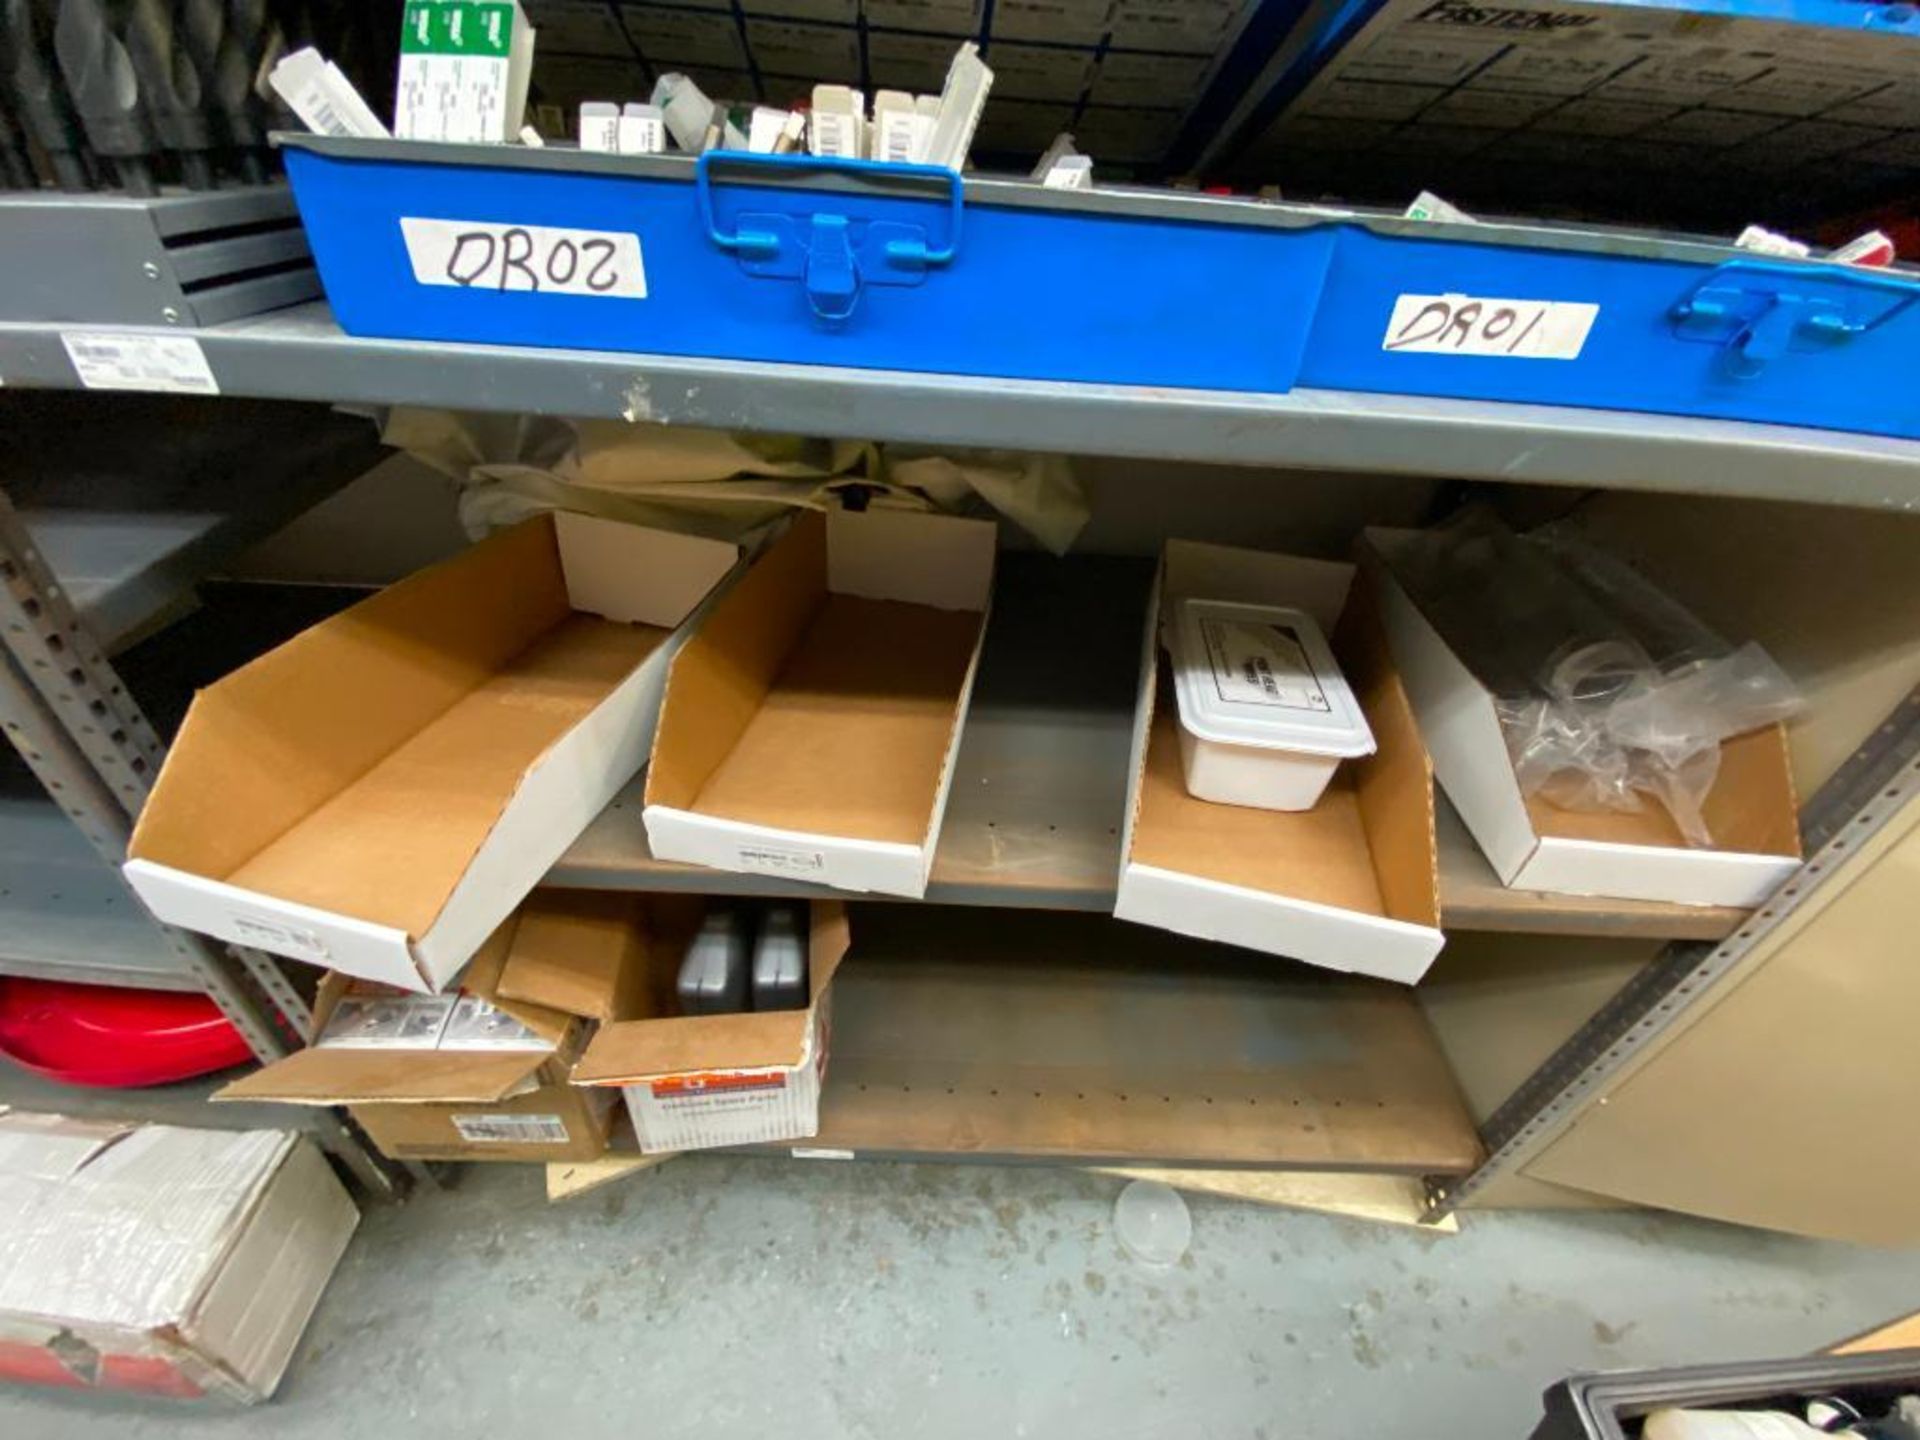 contents of supply room, JustRite flammable storage cabinets, SPX pump, assorted bits, Cryospray, in - Image 11 of 31